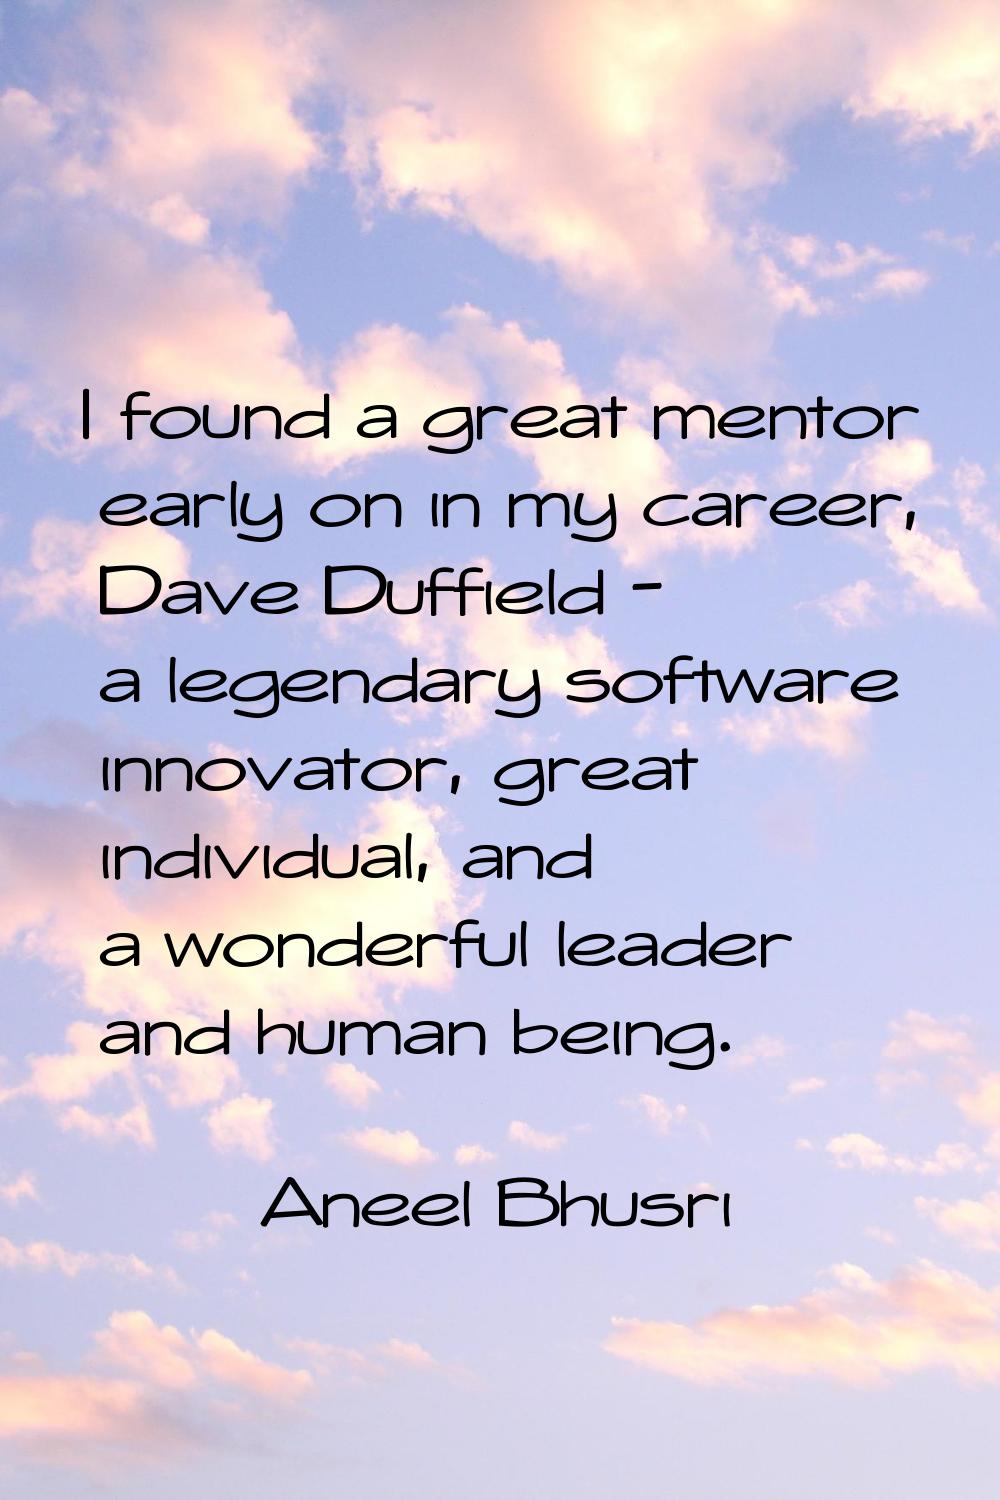 I found a great mentor early on in my career, Dave Duffield - a legendary software innovator, great